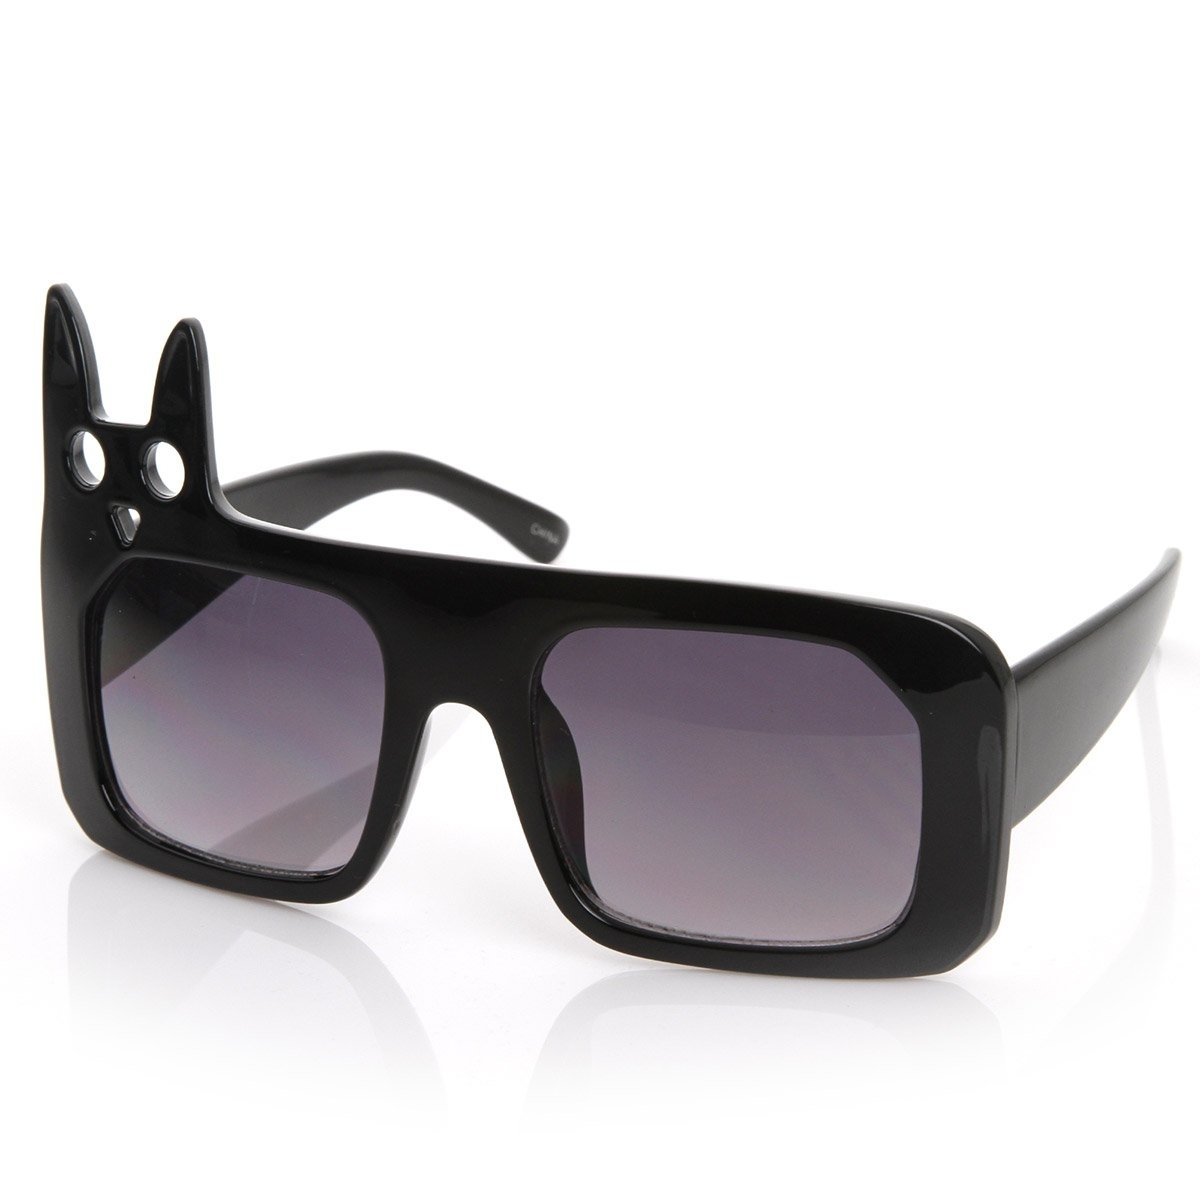 Luxe Inspired Fashion Kitty Cat Head Large Square Oversized Sunglasses - Black